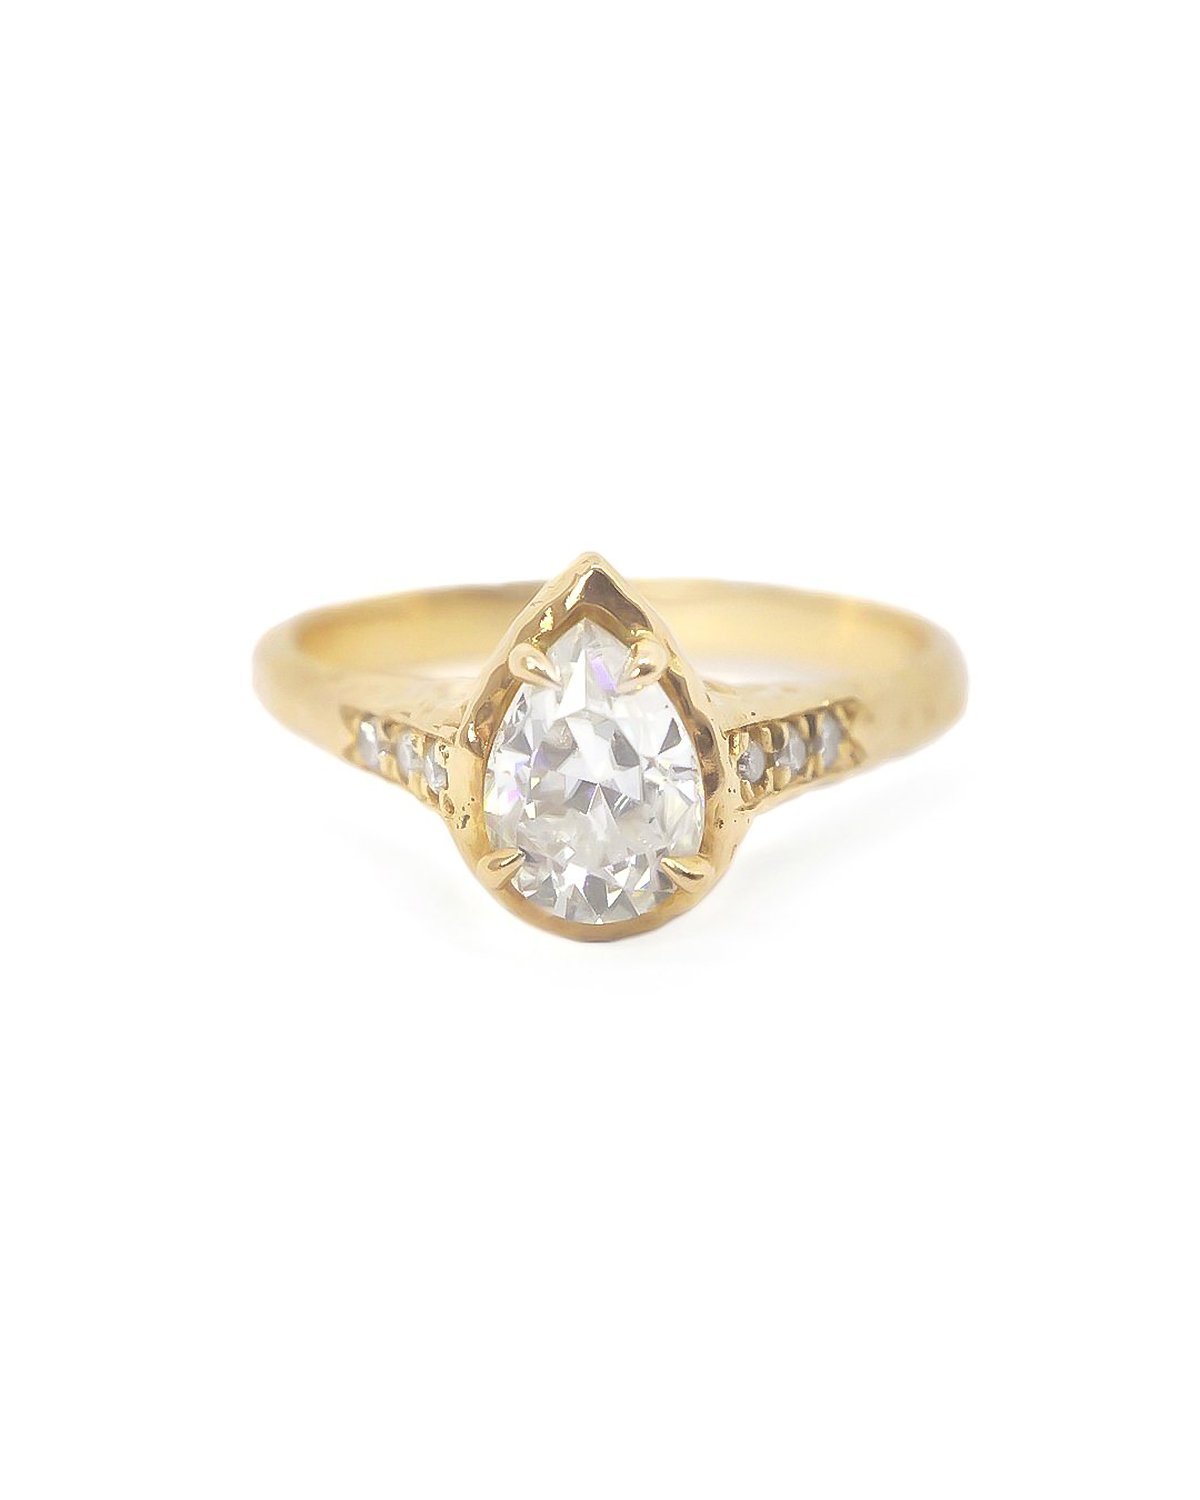 Rustic Pear Shaped Engagement Ring with Diamond Pave' Accents (multipl ...